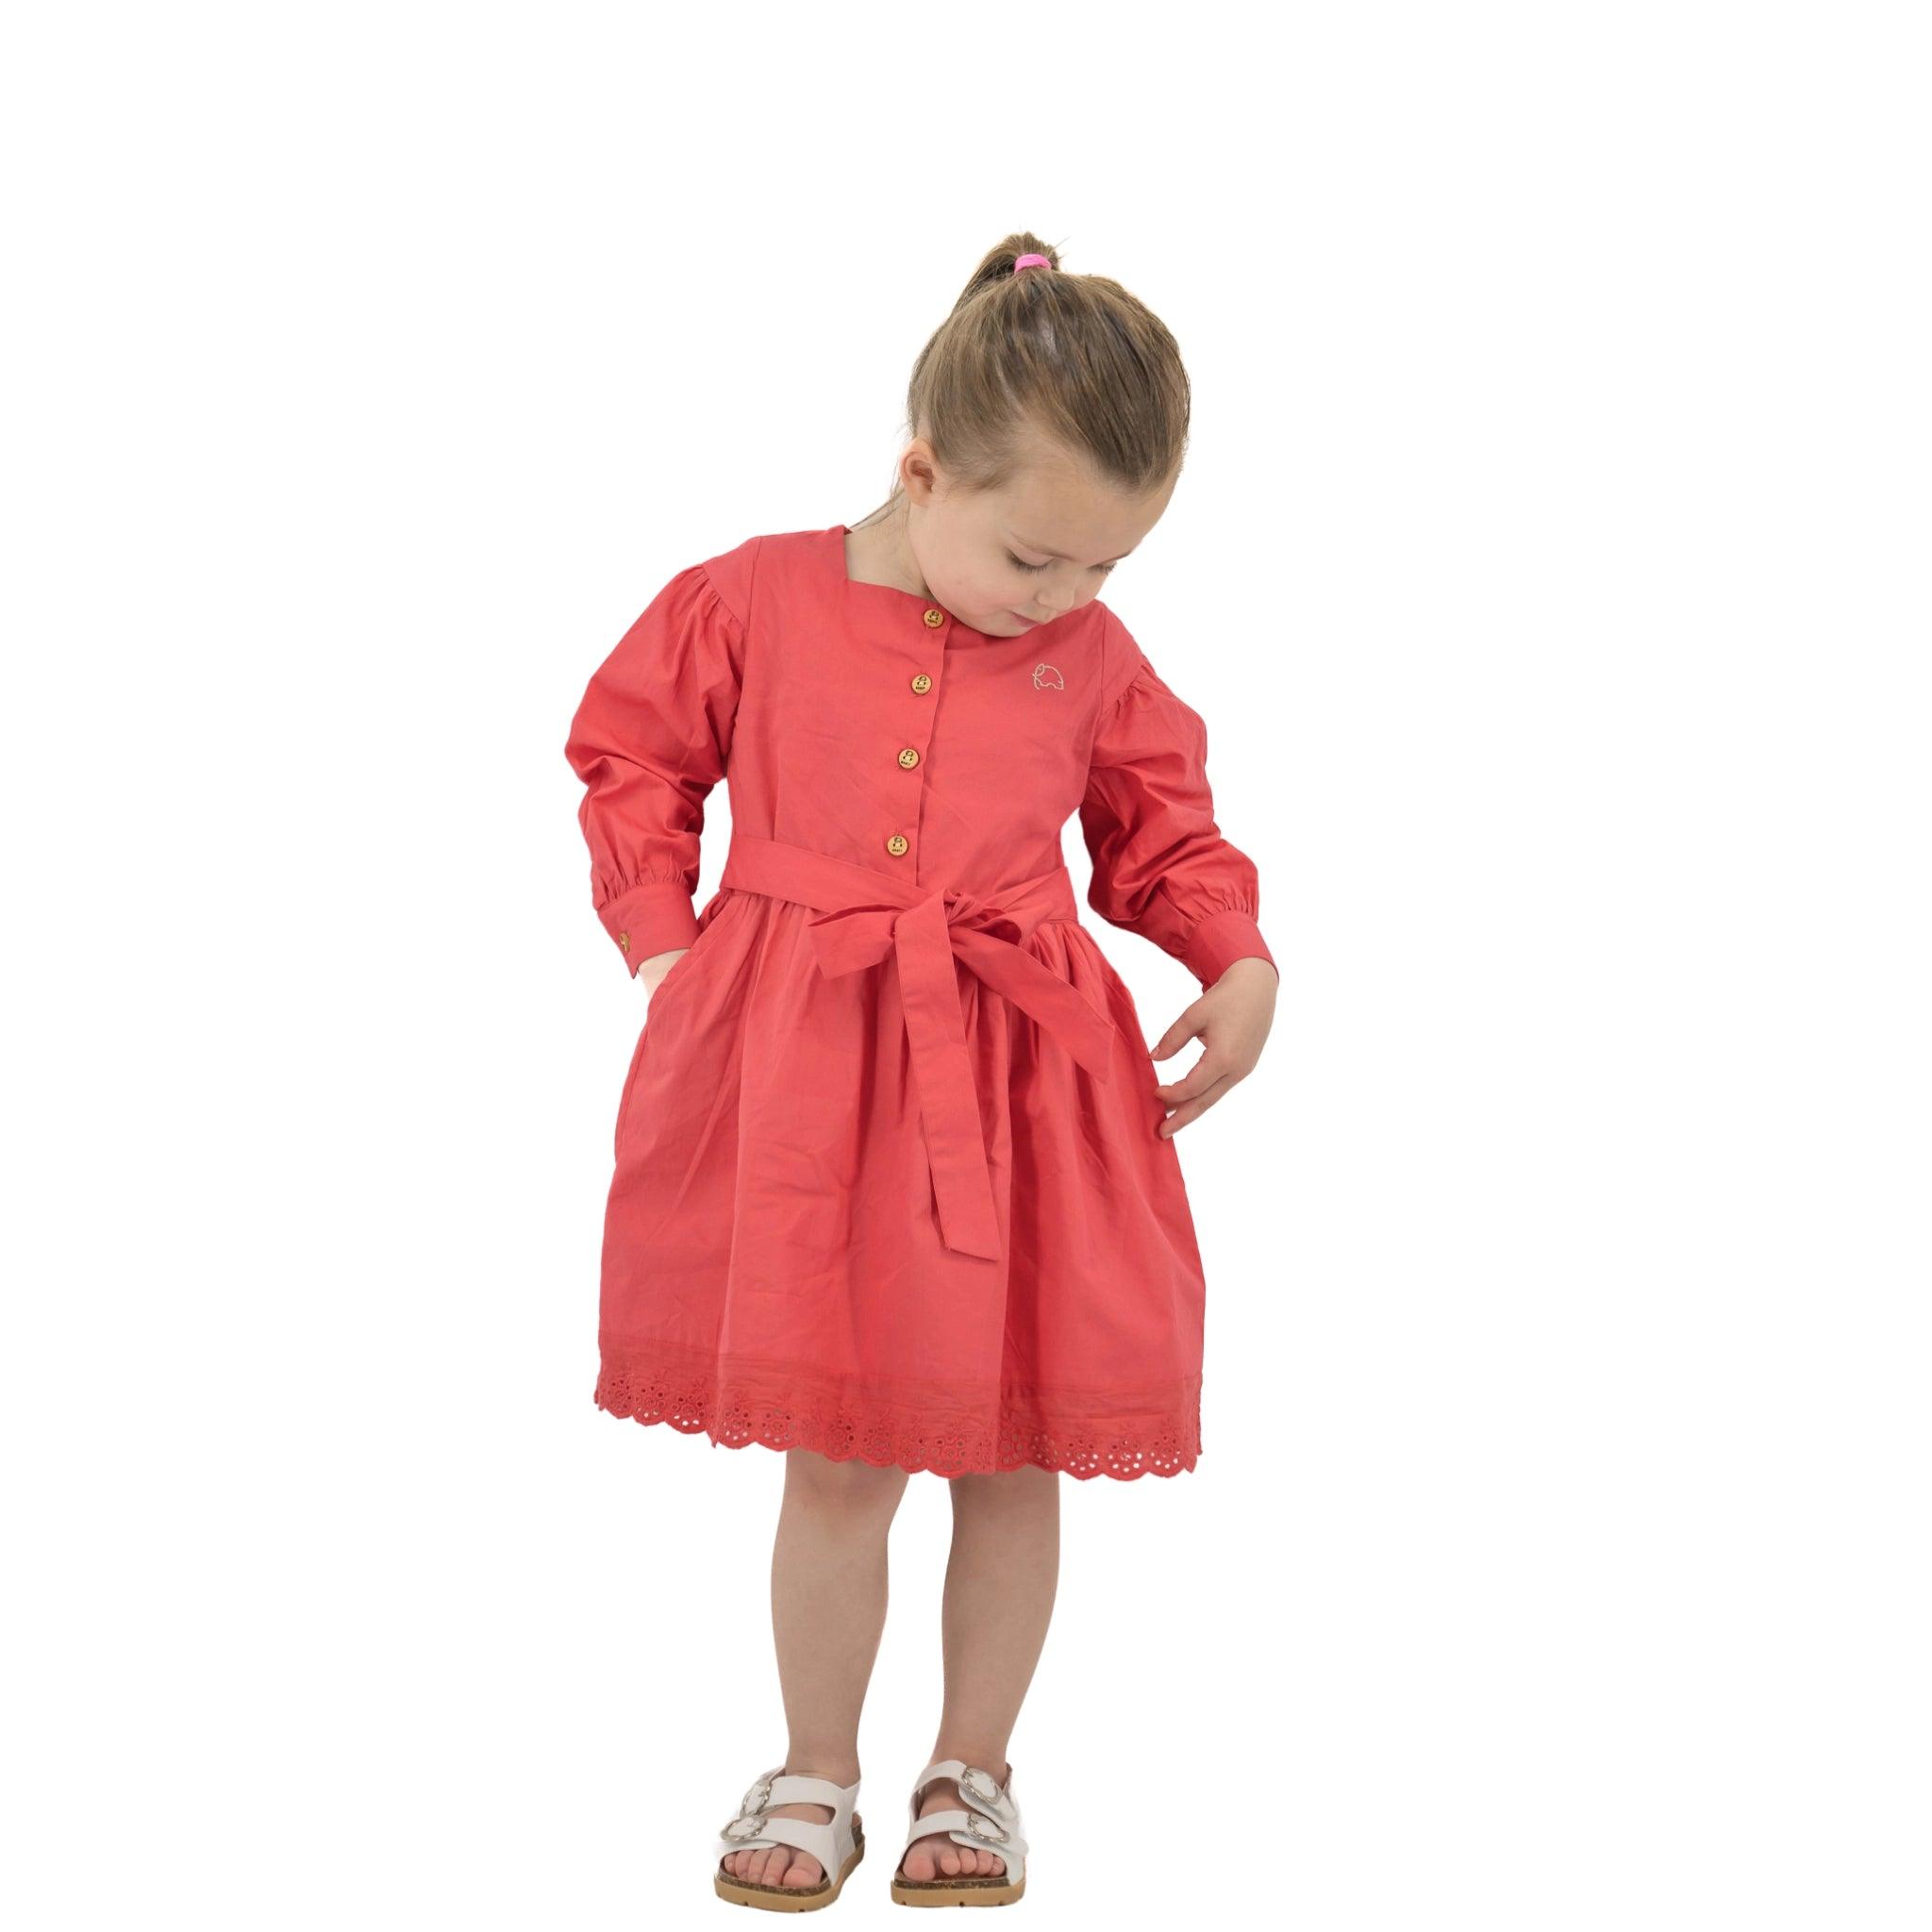 A young girl in a Karee Red Long Puff Sleeve Cotton Dress looking down at her dress, standing against a white background.